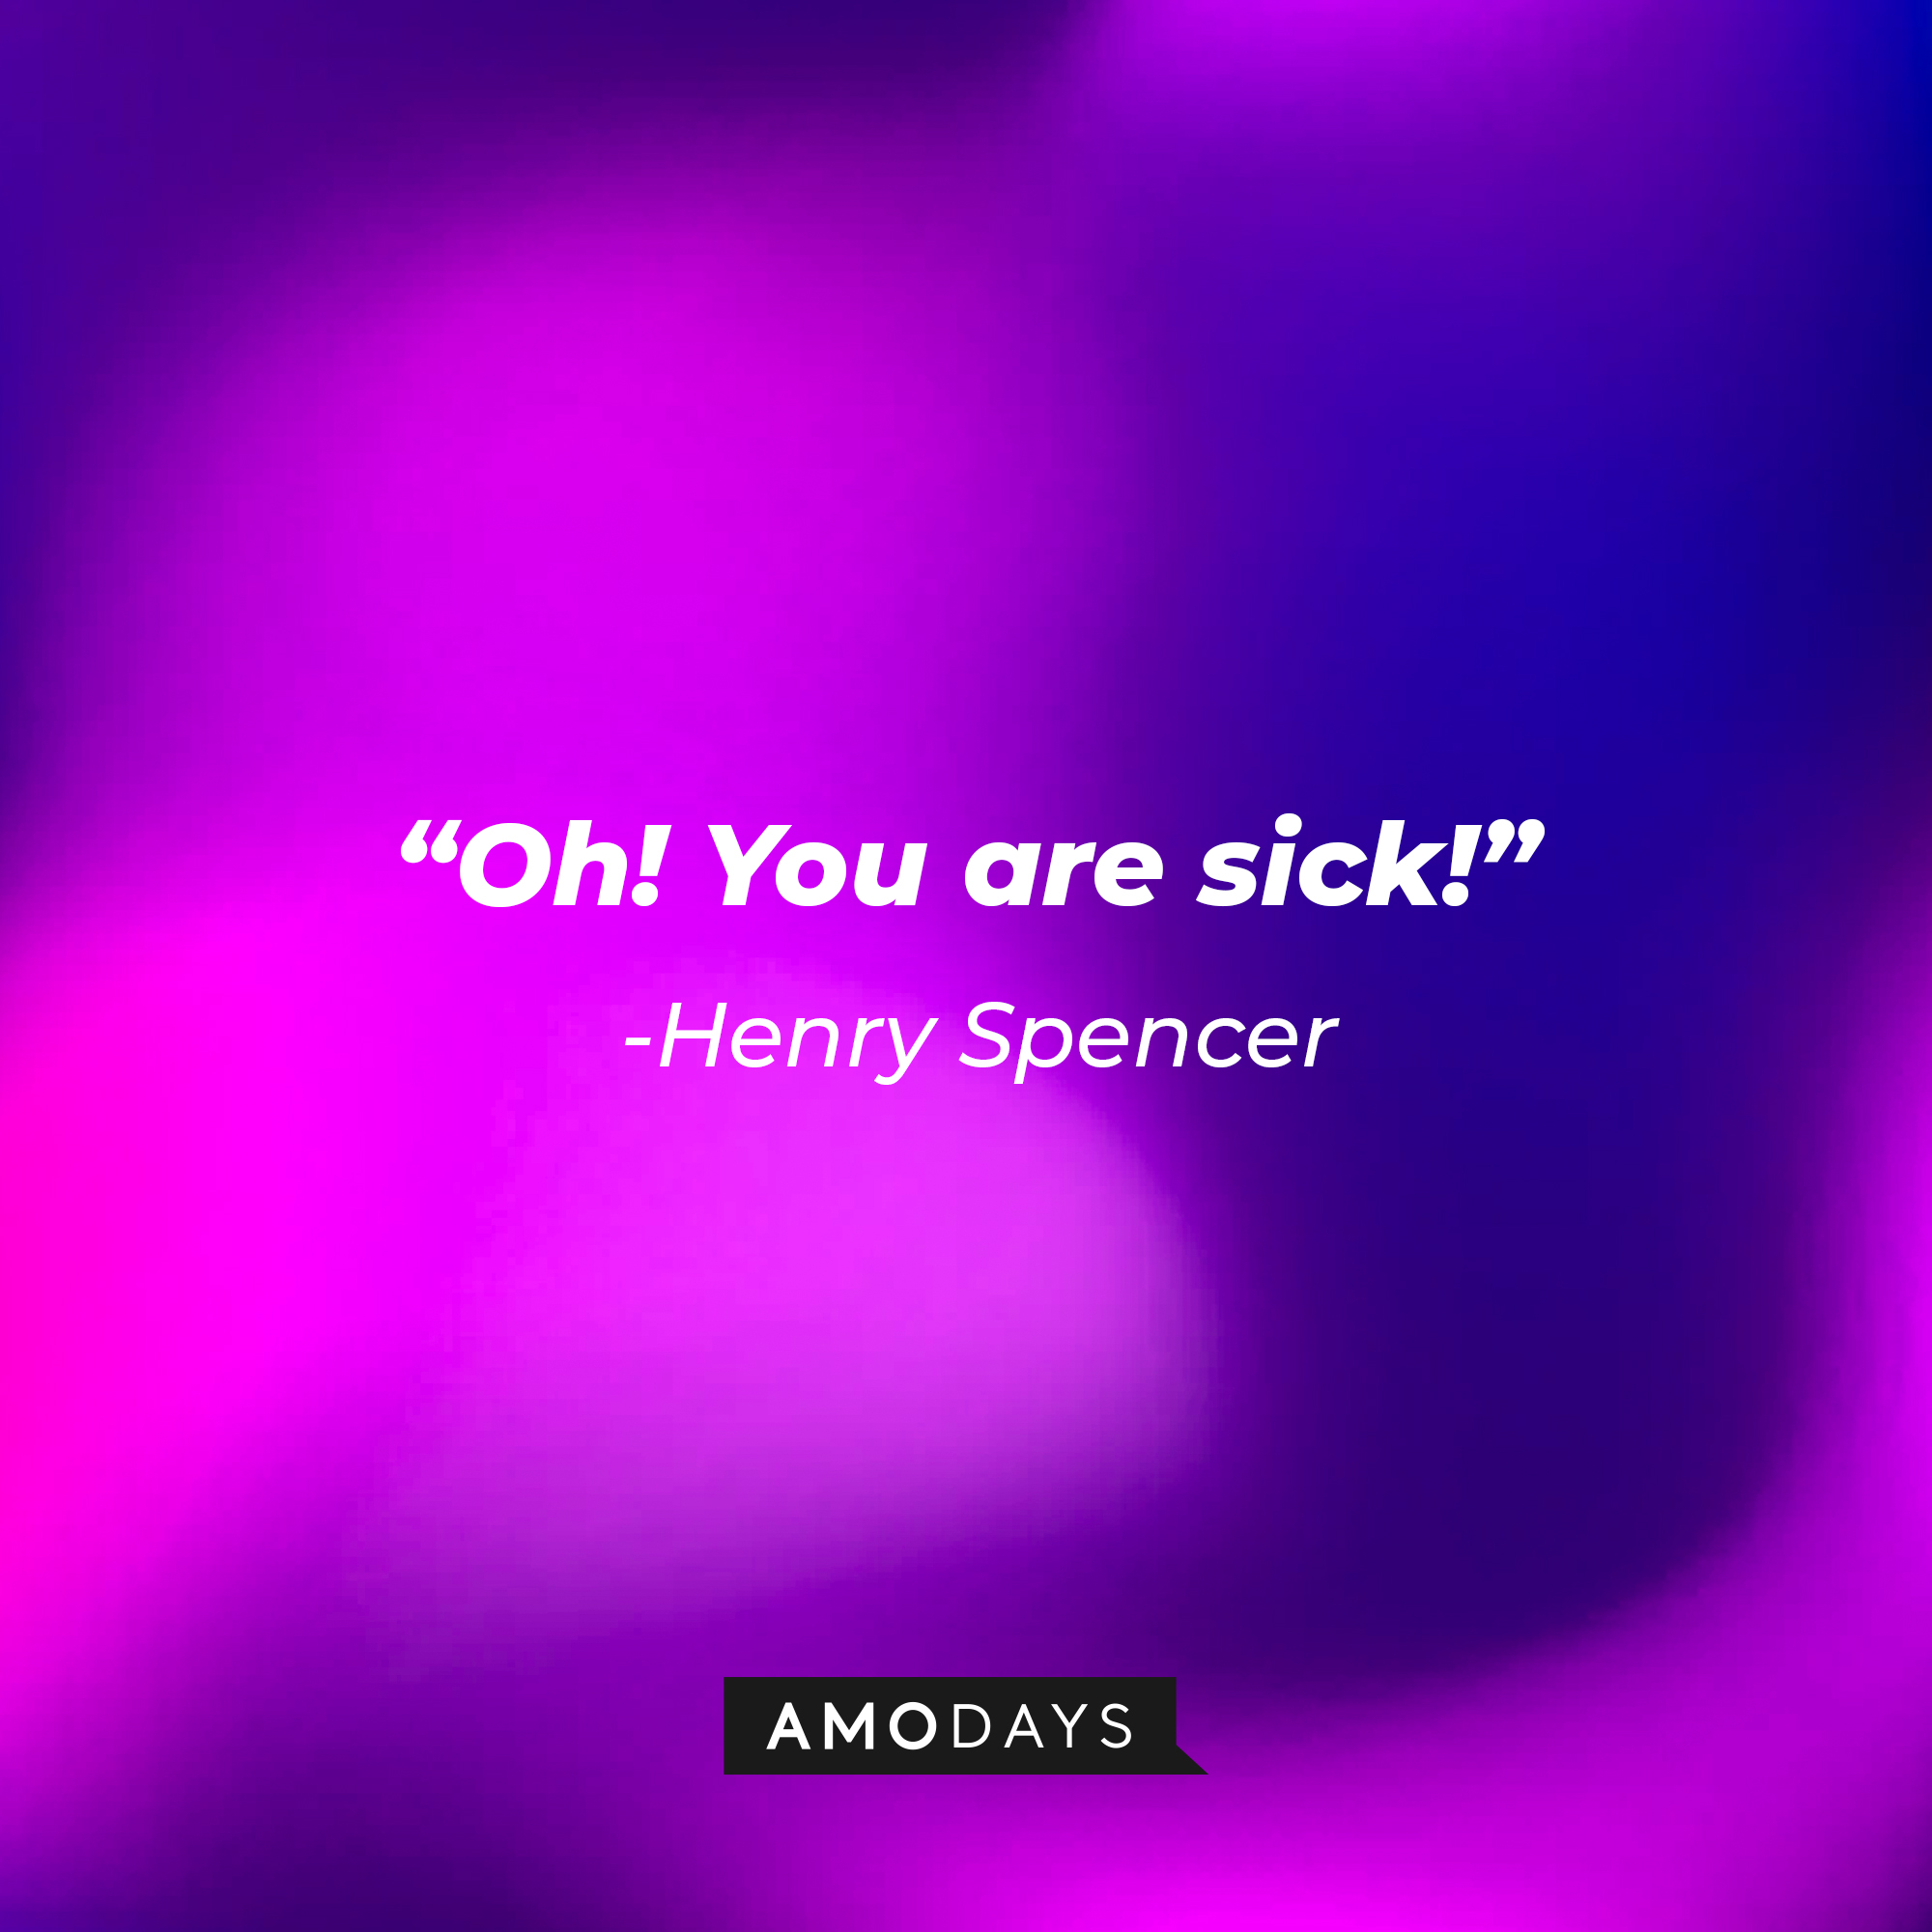 Henry Spencer’s quote: “Oh! You are sick!” | Source: AmoDays